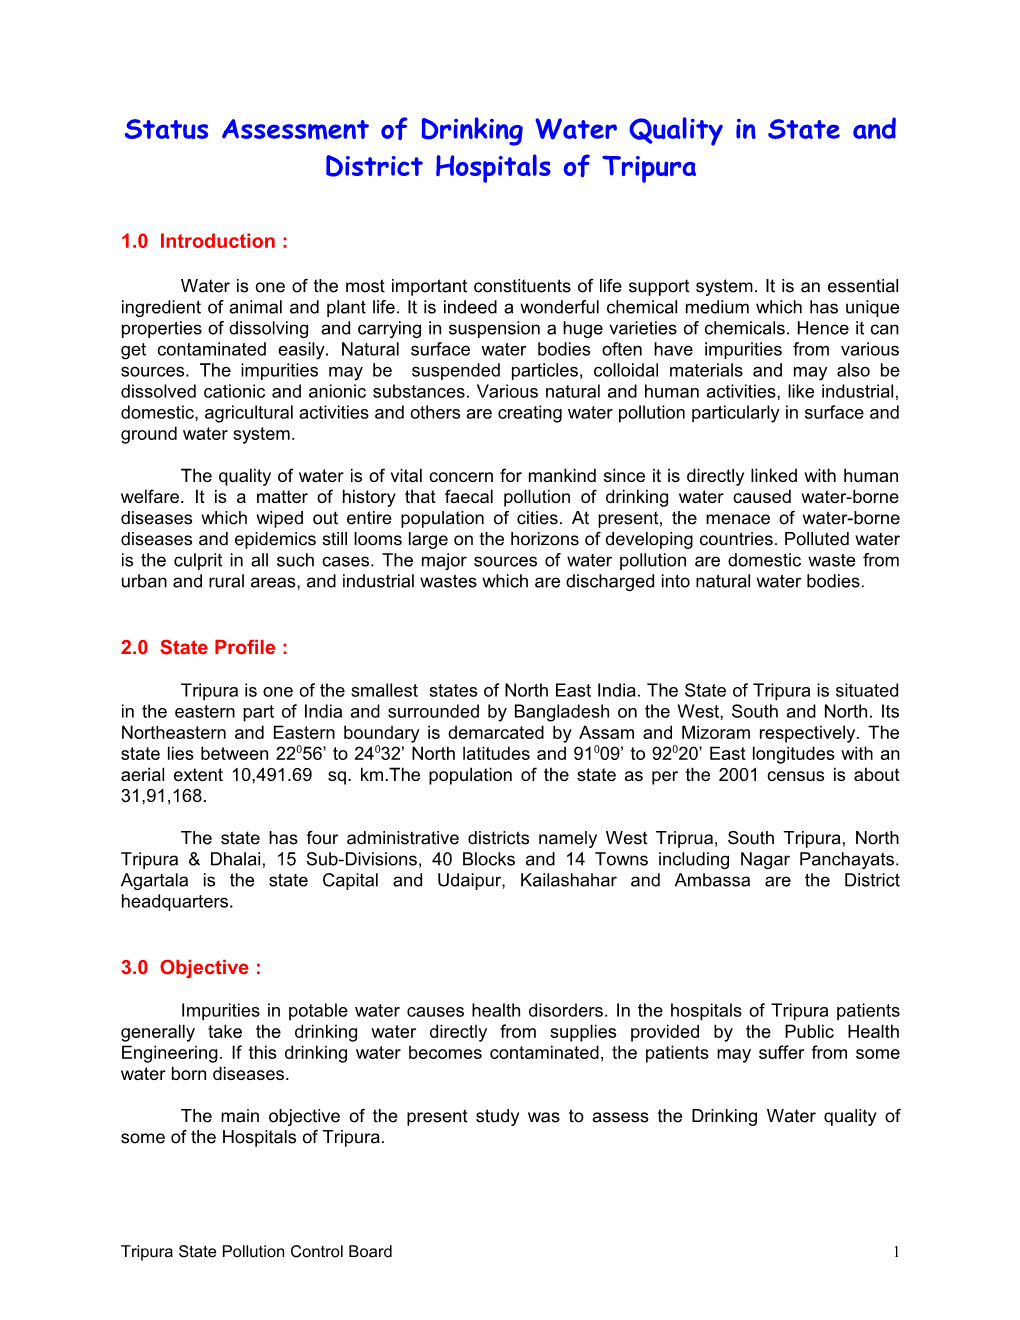 Status Assessment of Drinking Water Quality in State and District Hospitals of Tripura